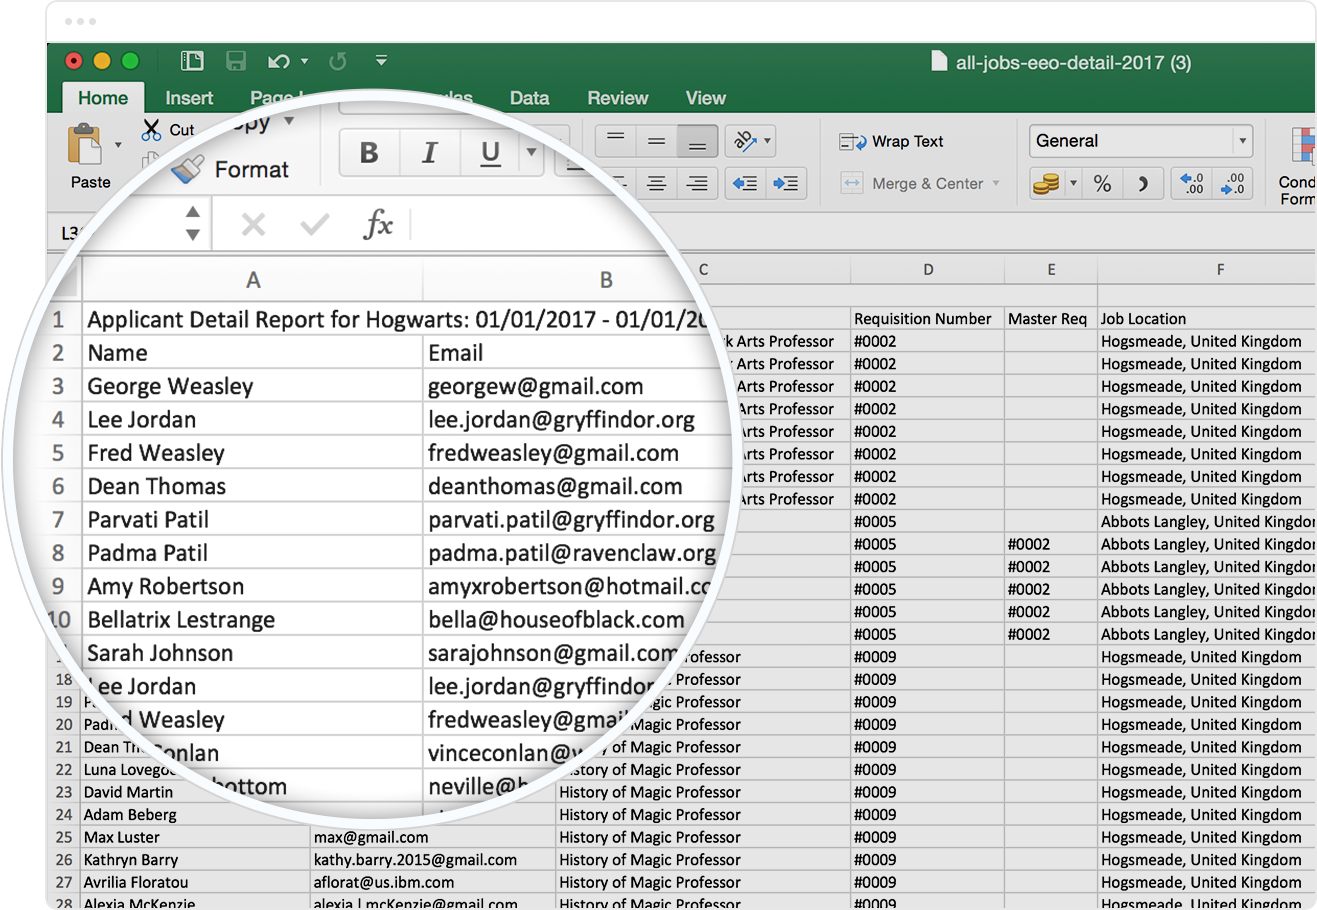 An excel spreadsheet exported from JobScore.